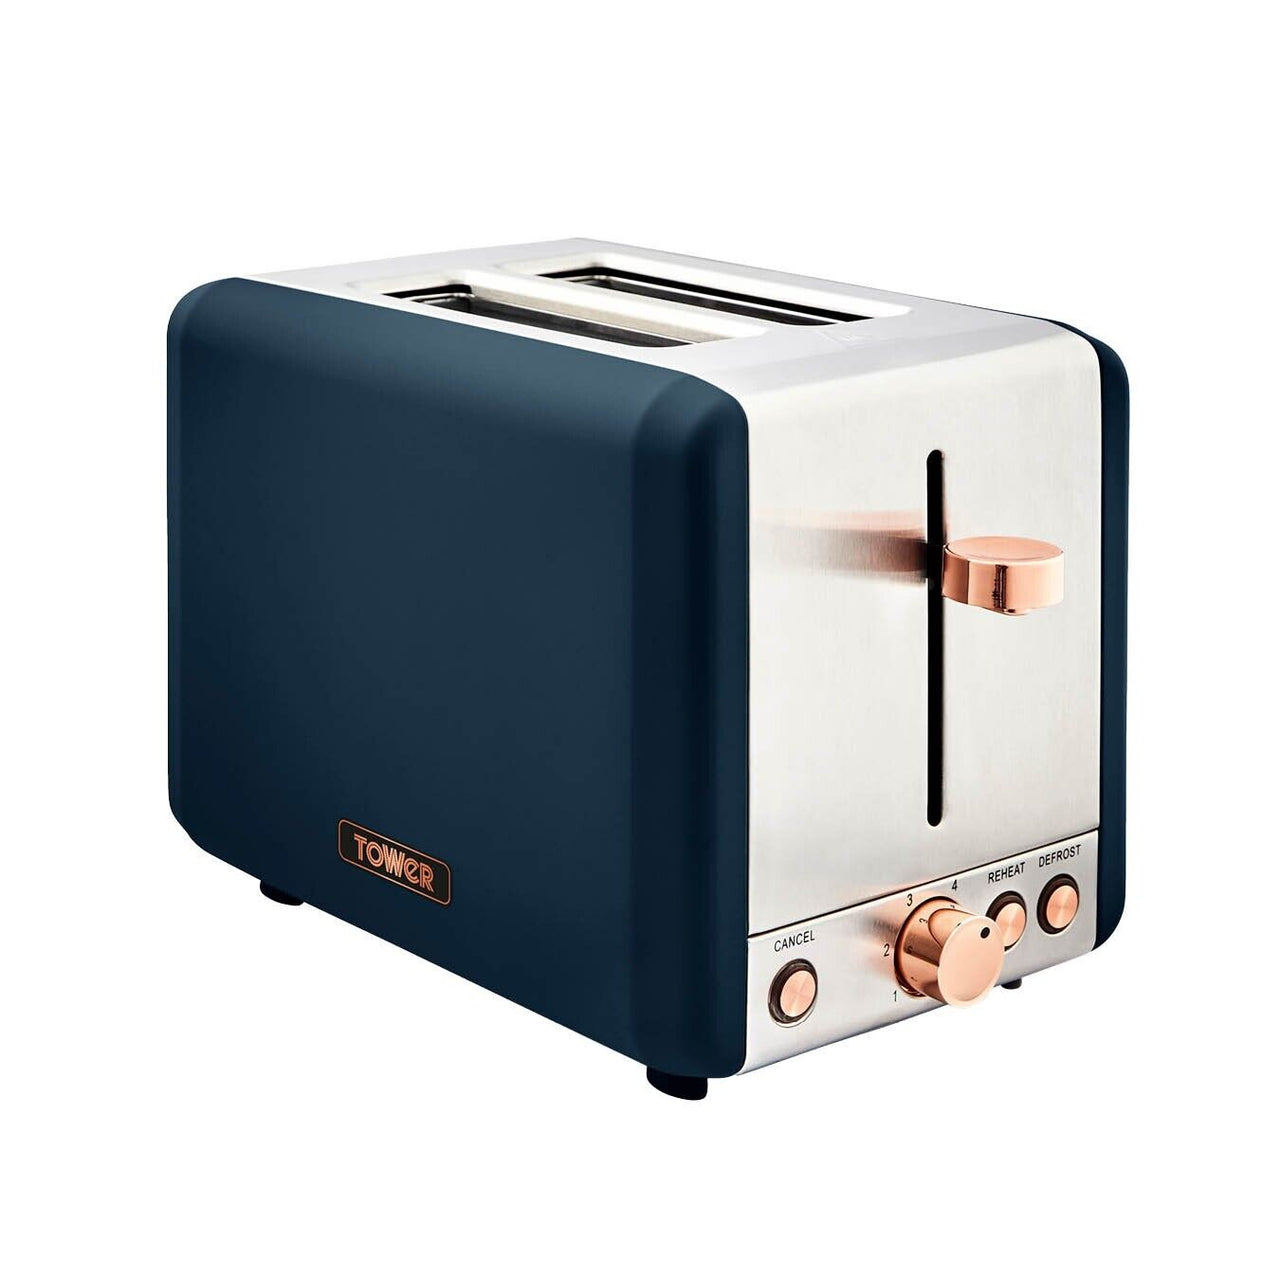 Tower Cavaletto T20036MNB 2 Slice Toaster in Blue & Rose Gold. 3 Year Guarantee